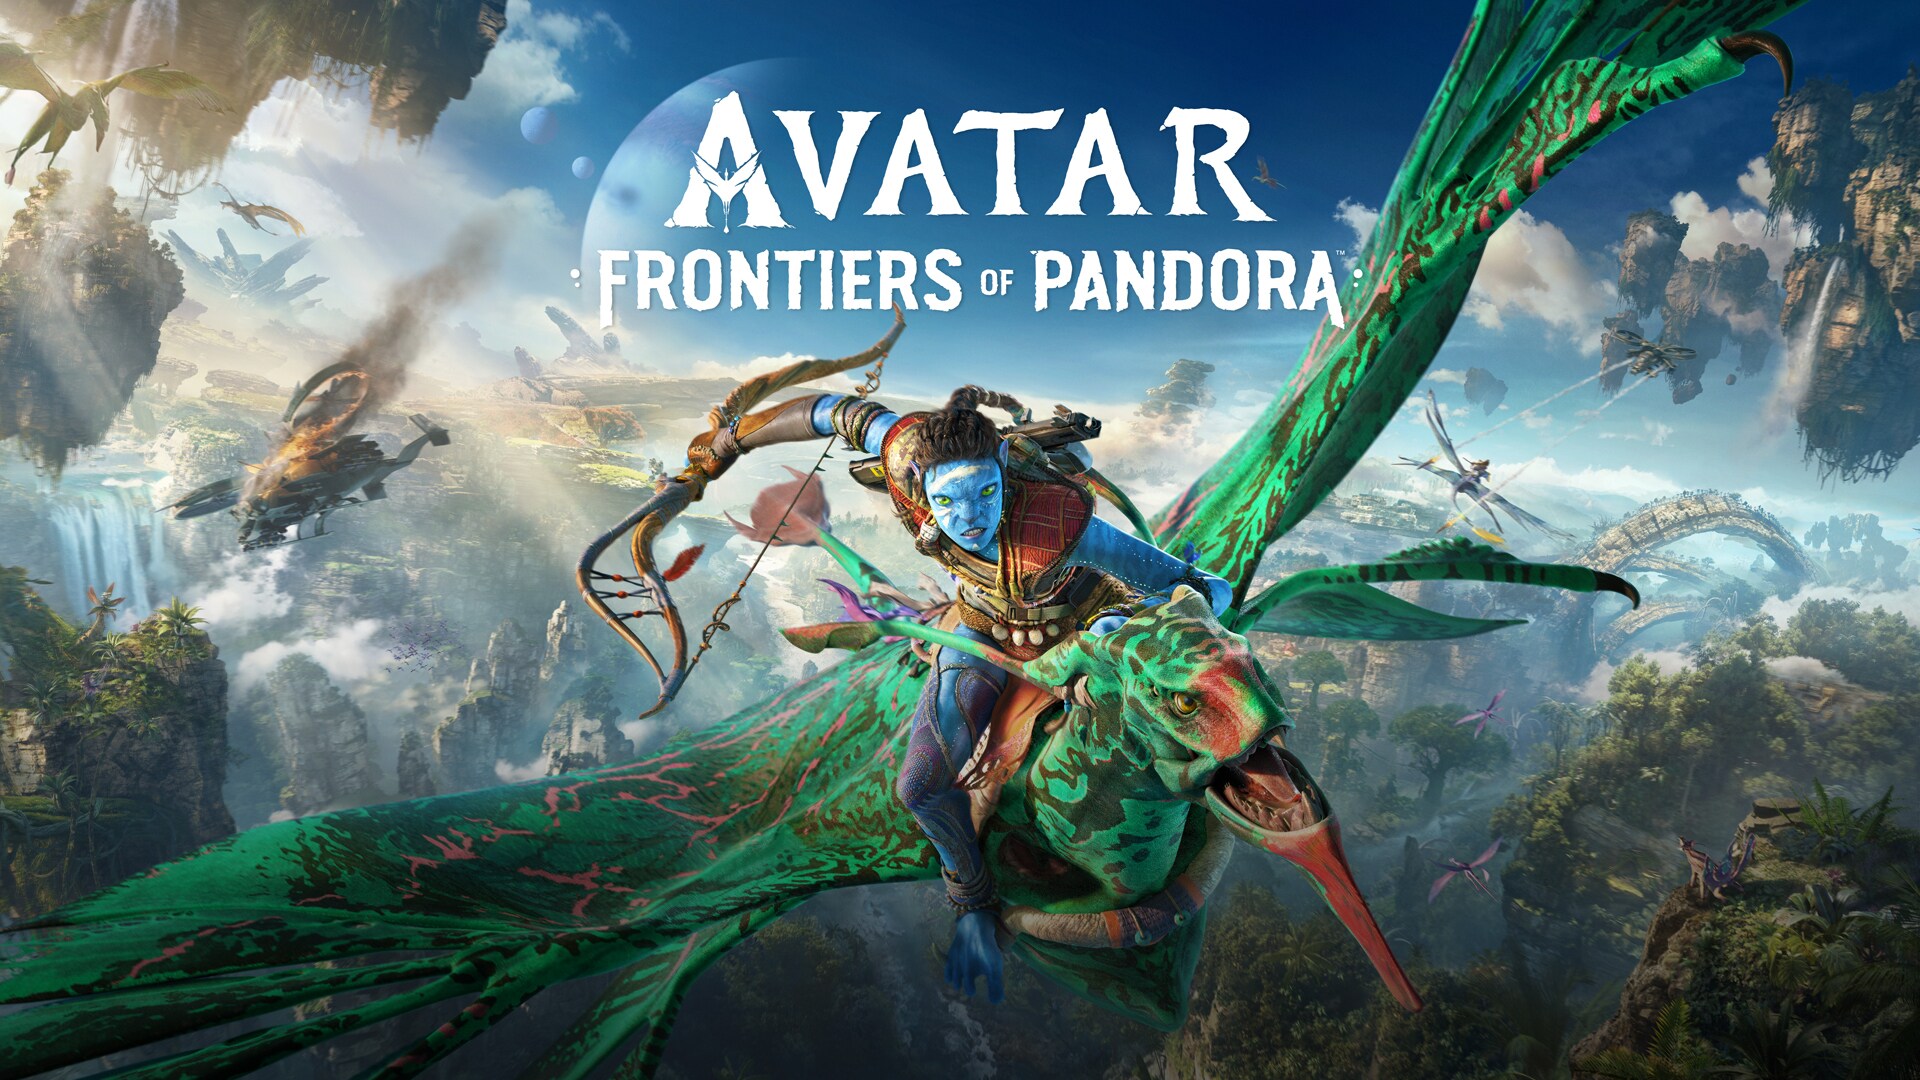 A Na'vi with a bow in one hand while flying on a banshee from the game "Avatar: Frontiers of Pandora."